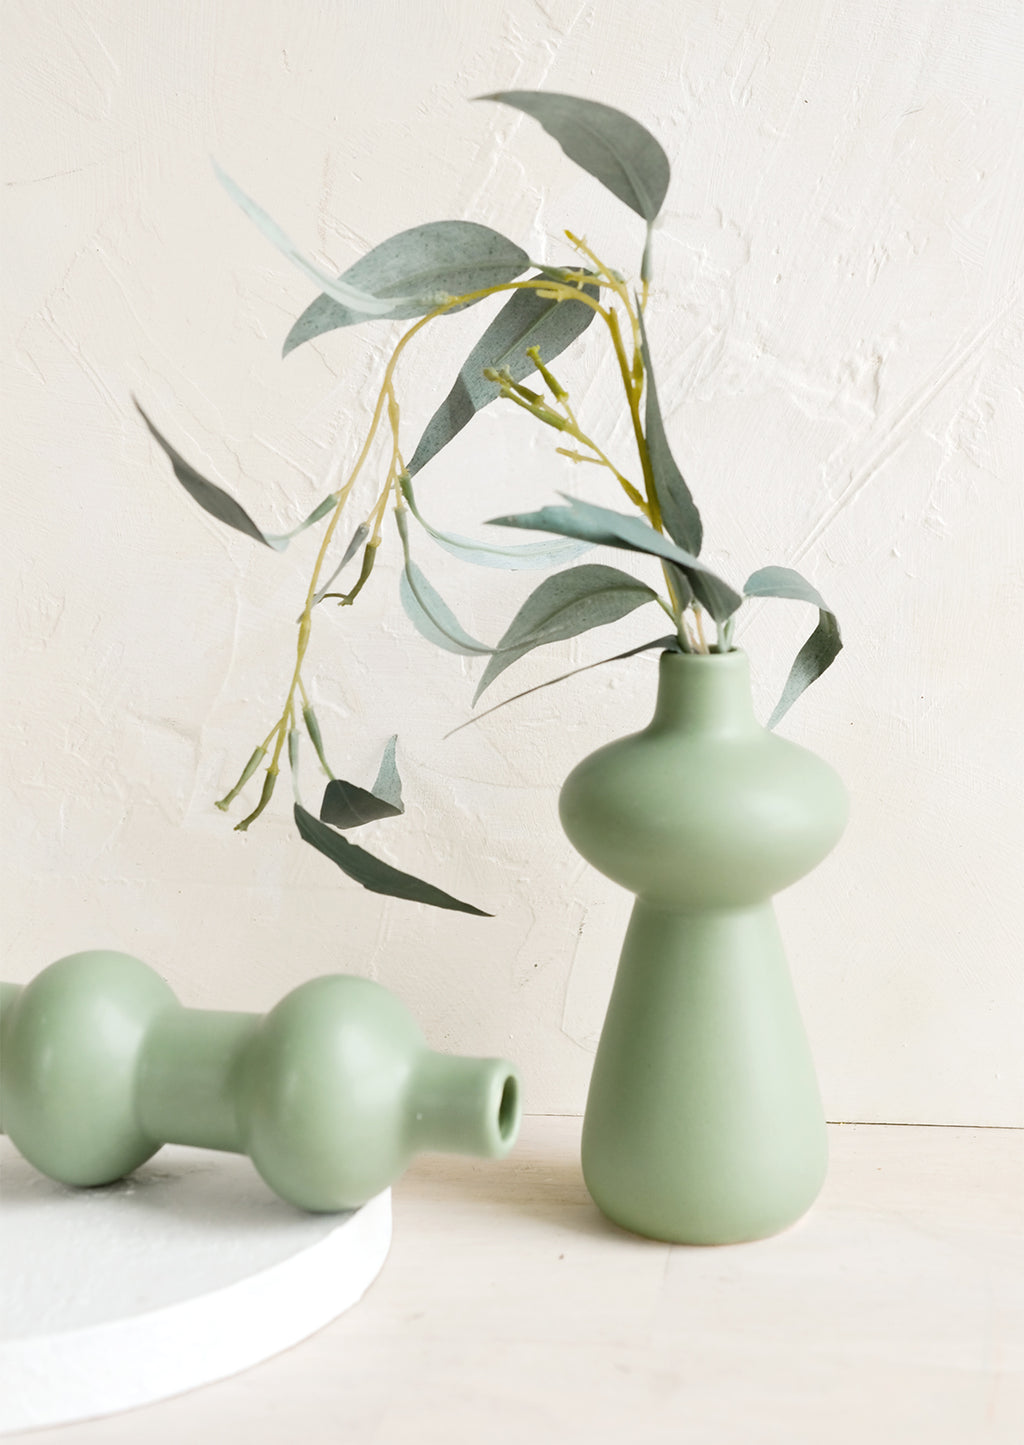 1: Mint green ceramic bud vases in curvy silhouettes.